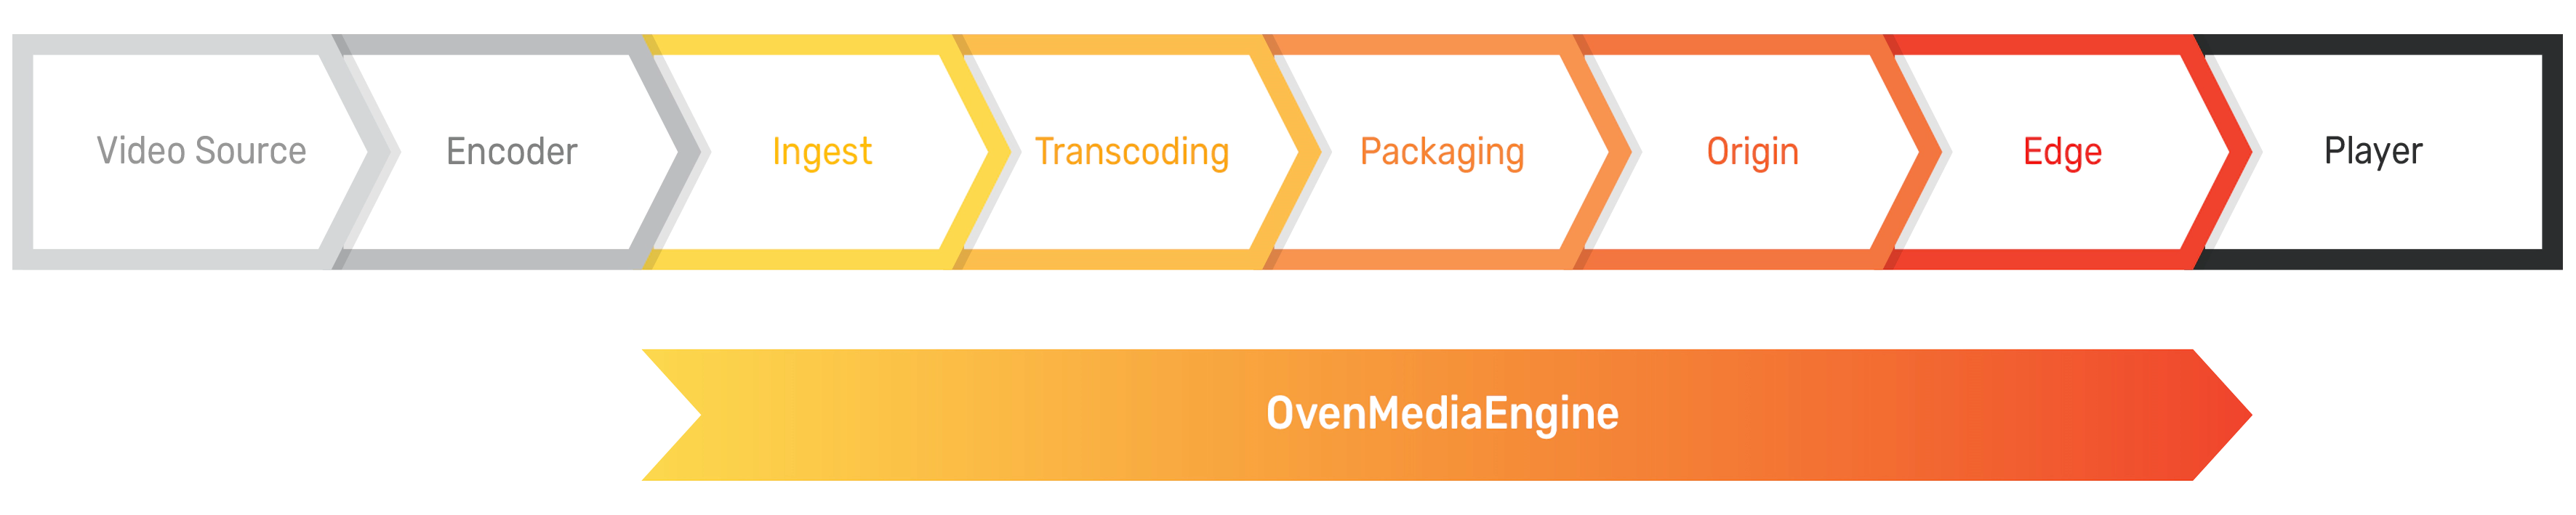 OvenMediaEngine's role in Streaming FLow